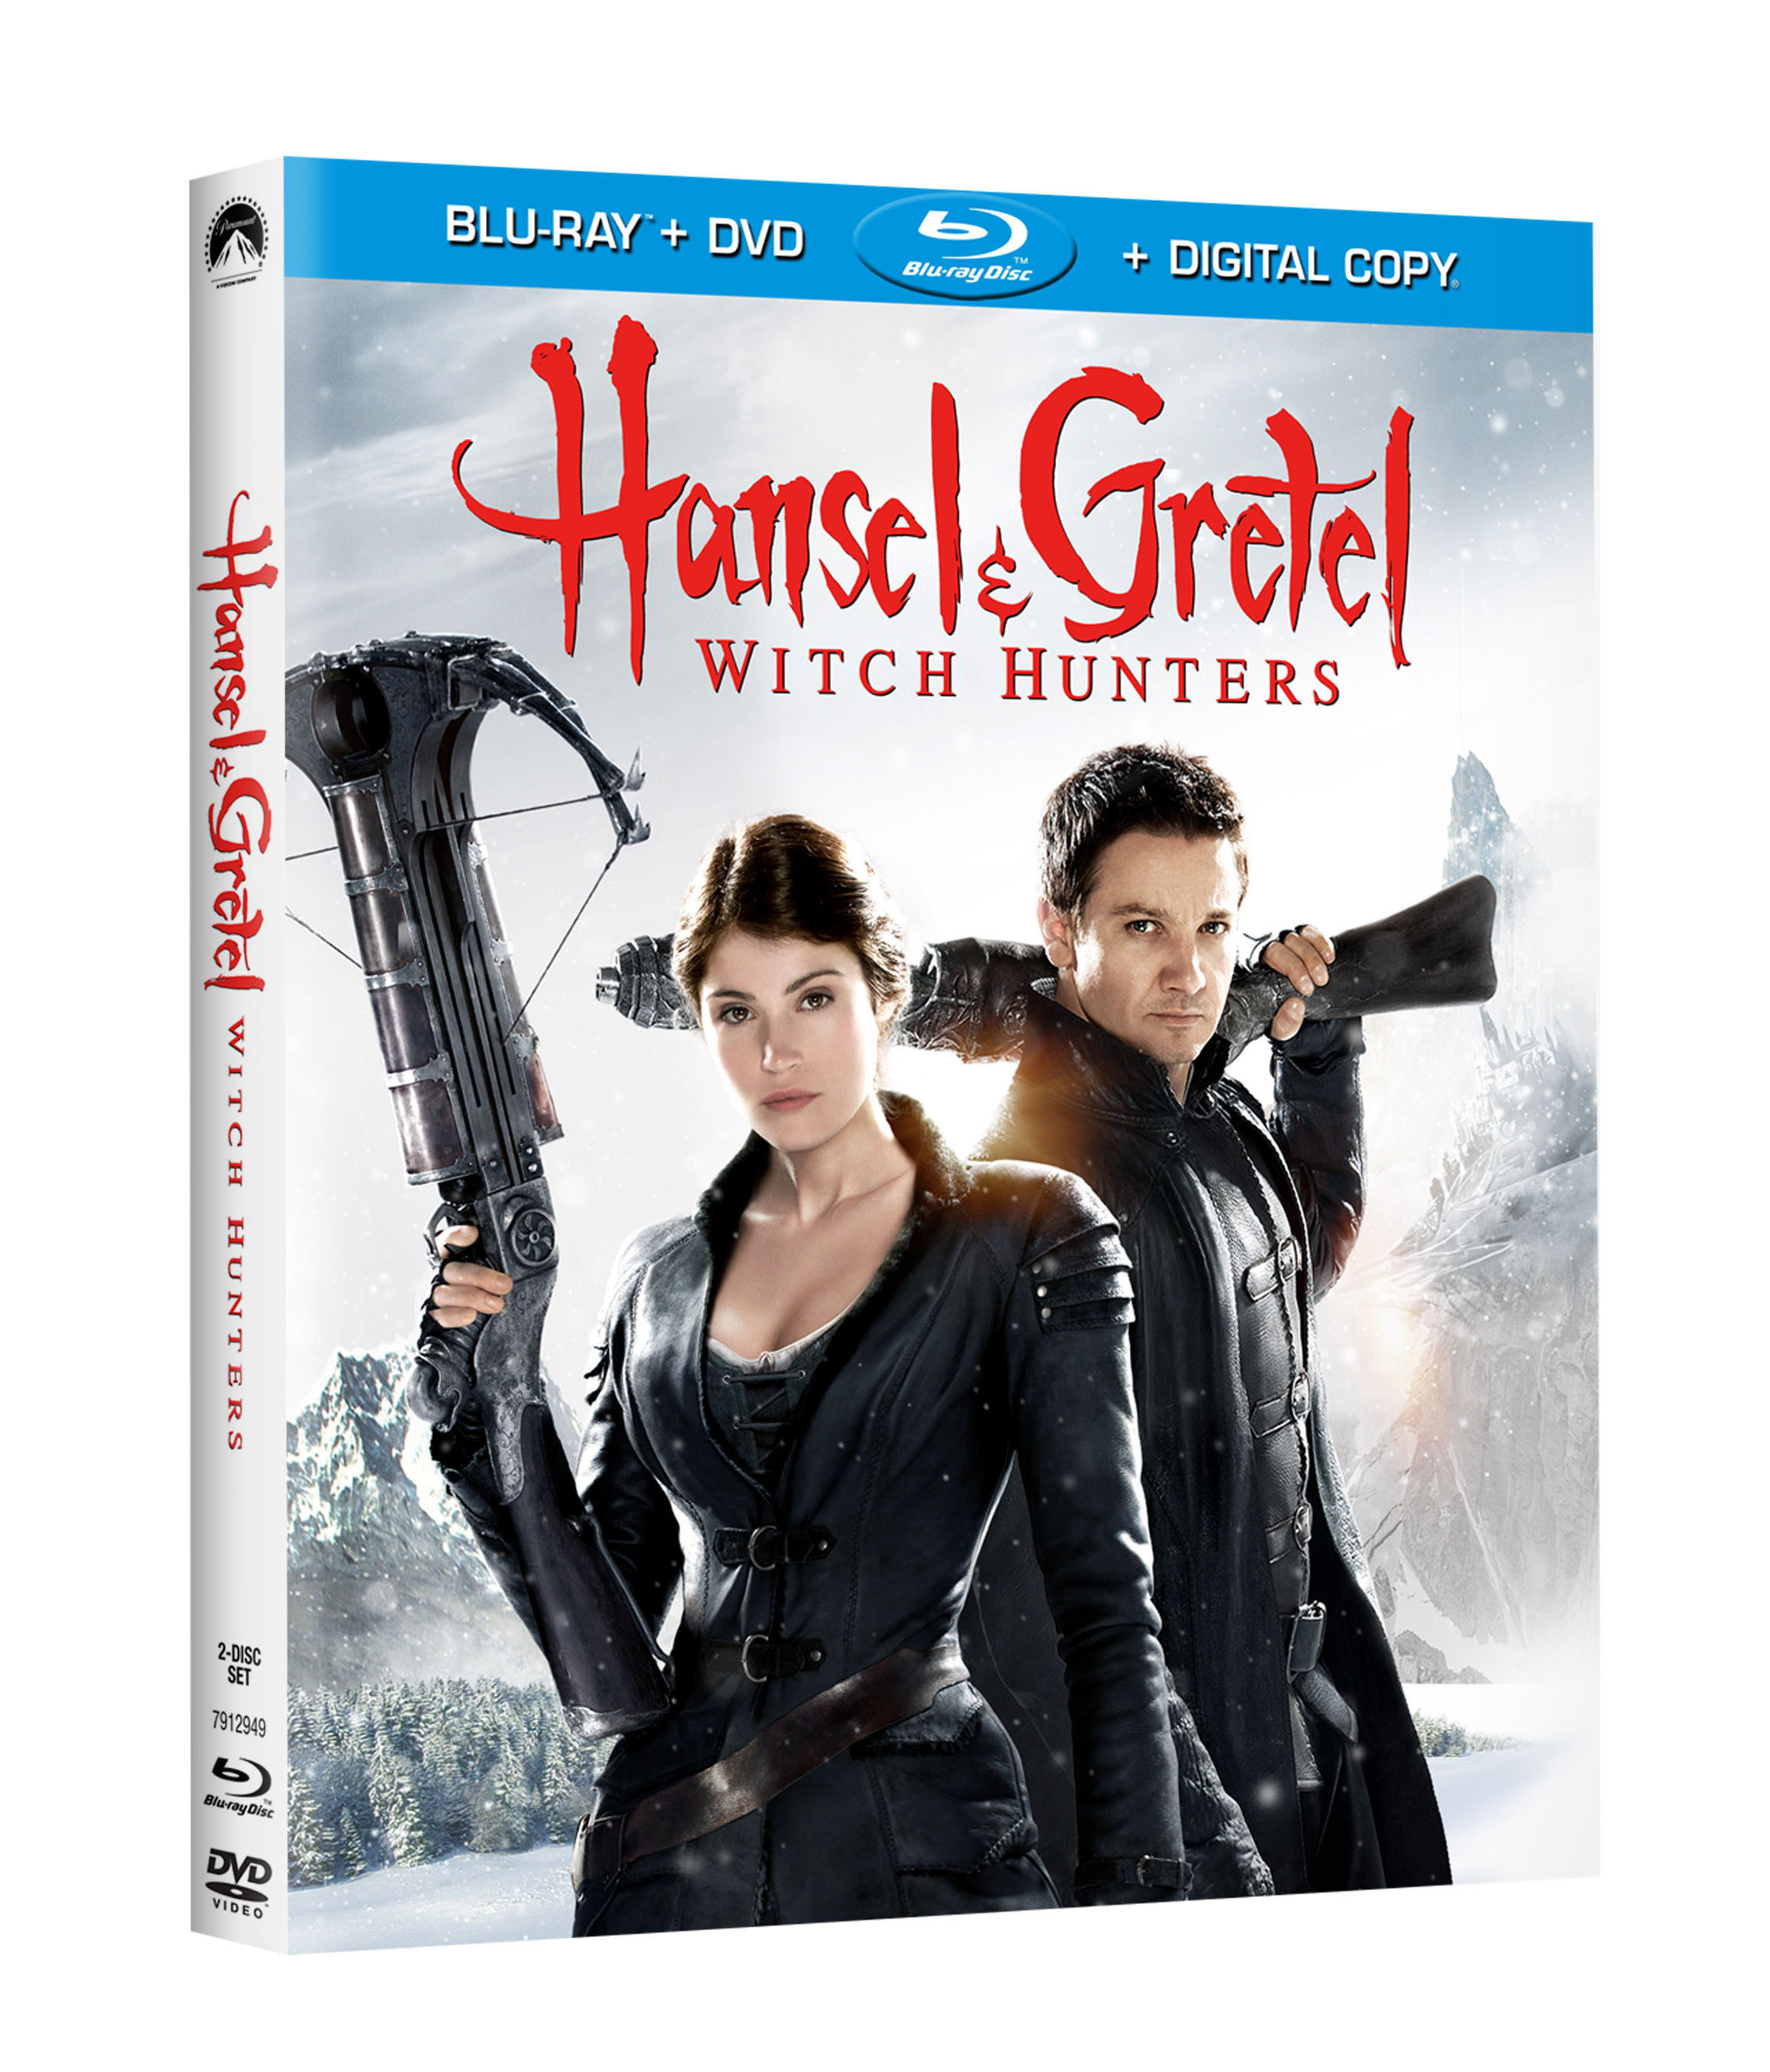 HANSEL & GRETEL: WITCH HUNTERS Comes To Blu-ray, Blu-ray 3D, DVD, On Demand June 11 ...